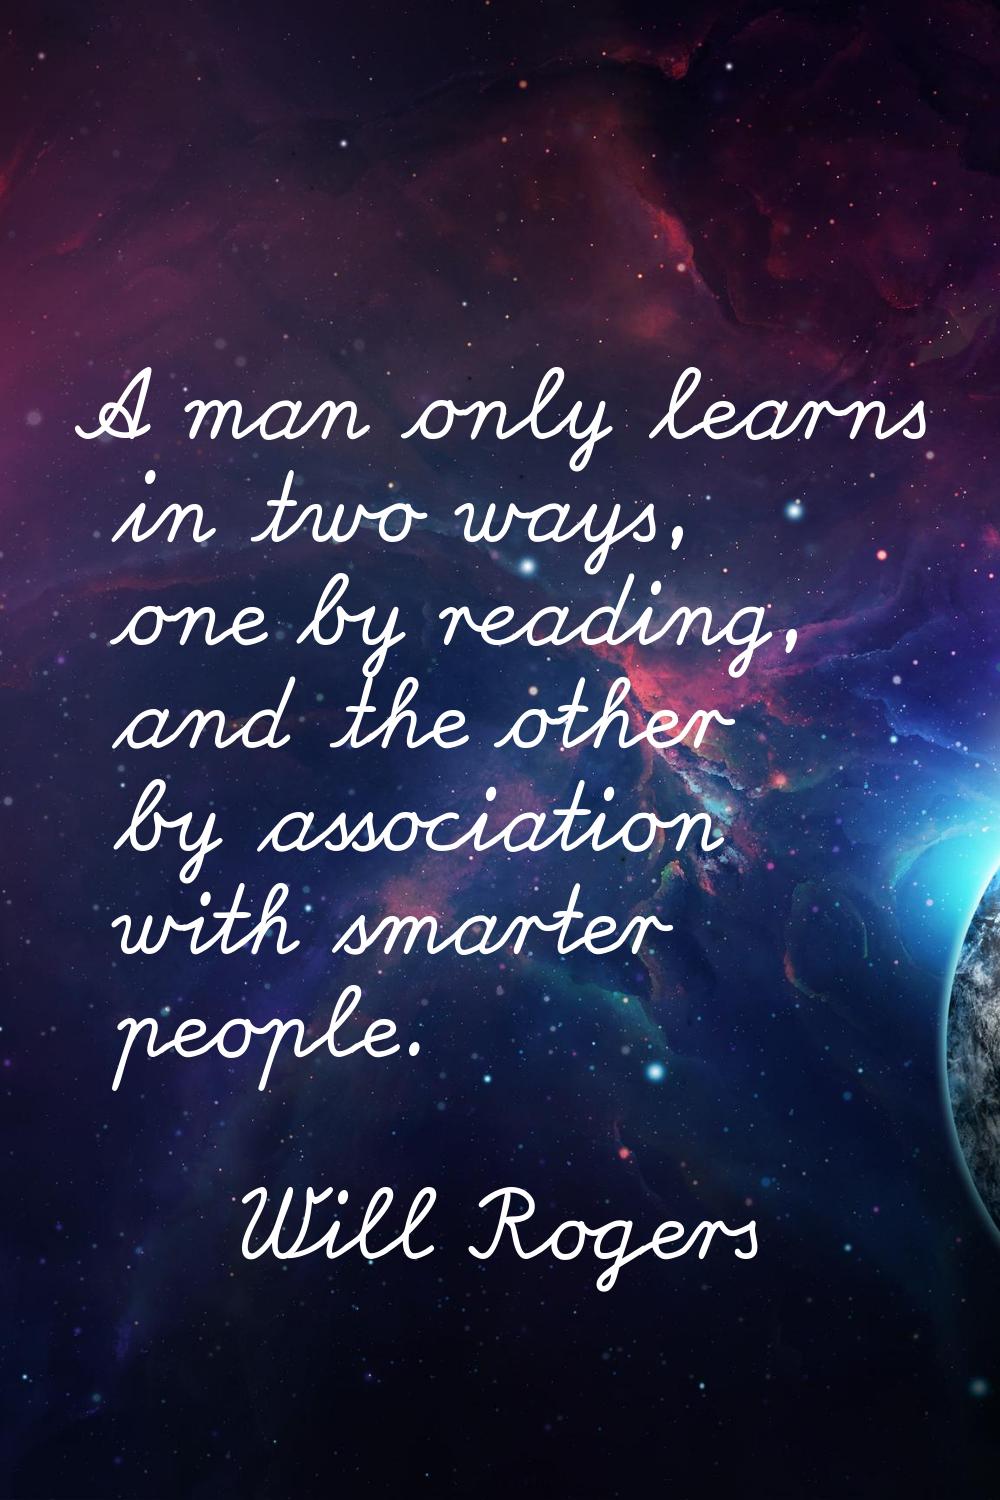 A man only learns in two ways, one by reading, and the other by association with smarter people.